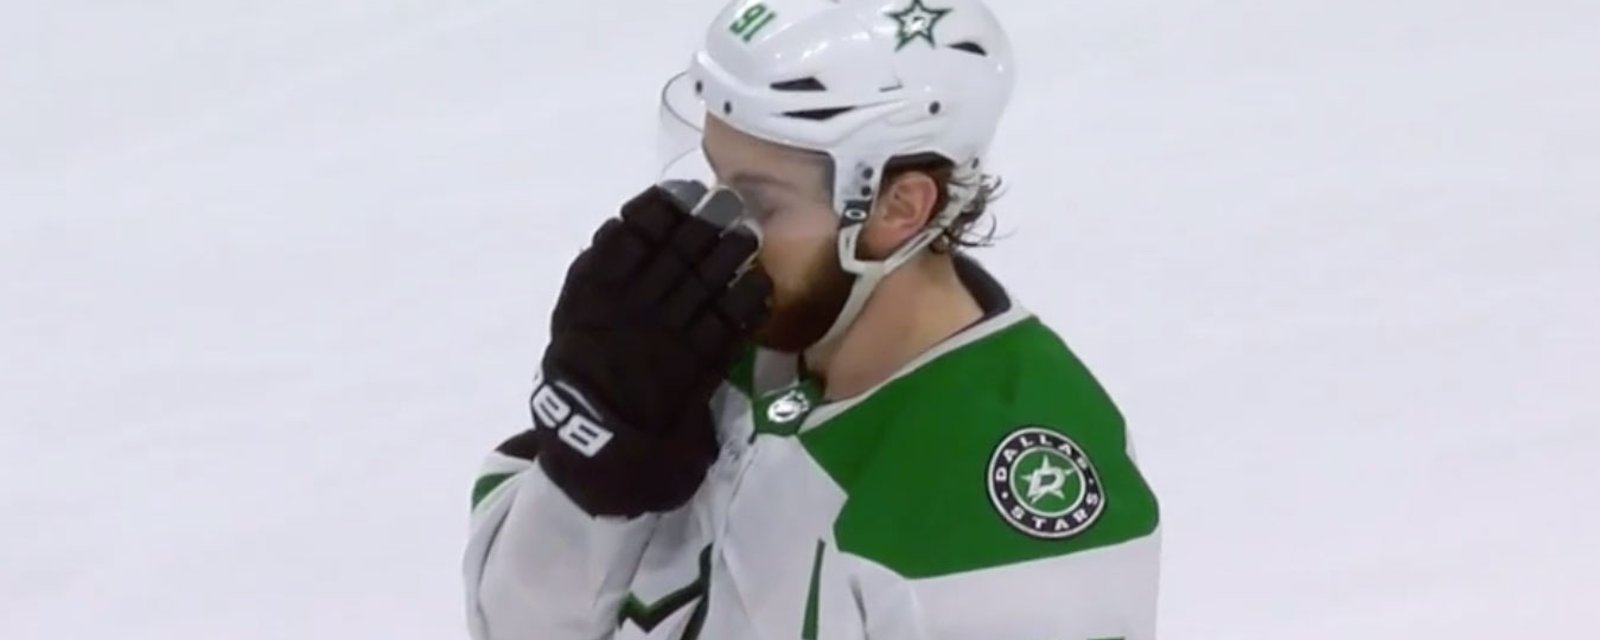 Seguin misses the empty net and has hilarious reaction to his failed attempt! 